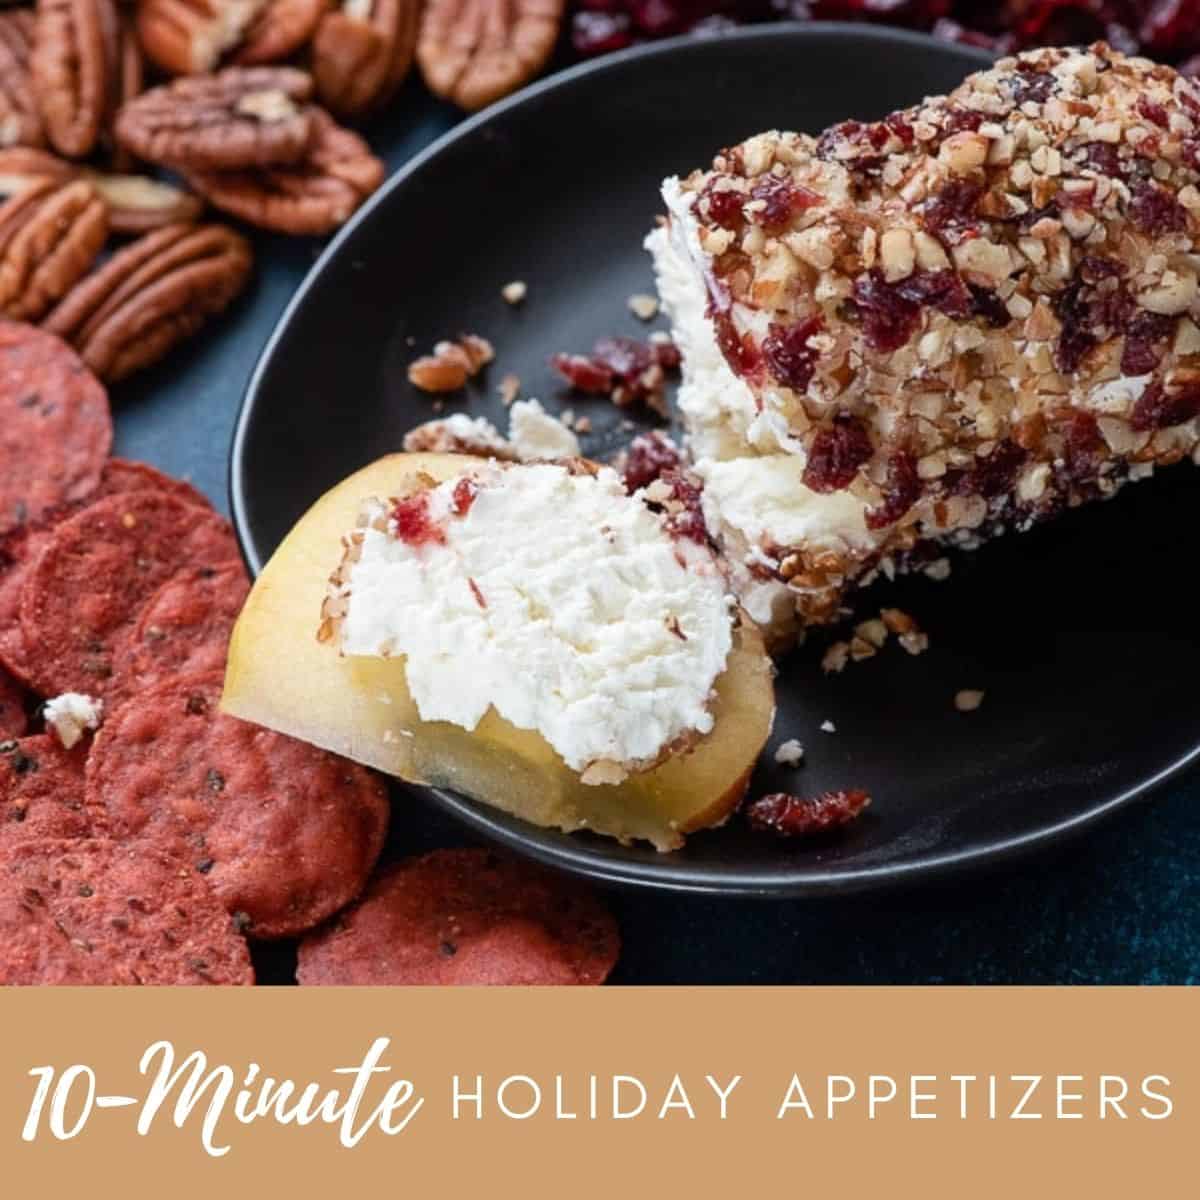 https://www.cupcakesandcutlery.com/wp-content/uploads/2021/11/10-minute-holiday-appetizers-featured-image.jpg